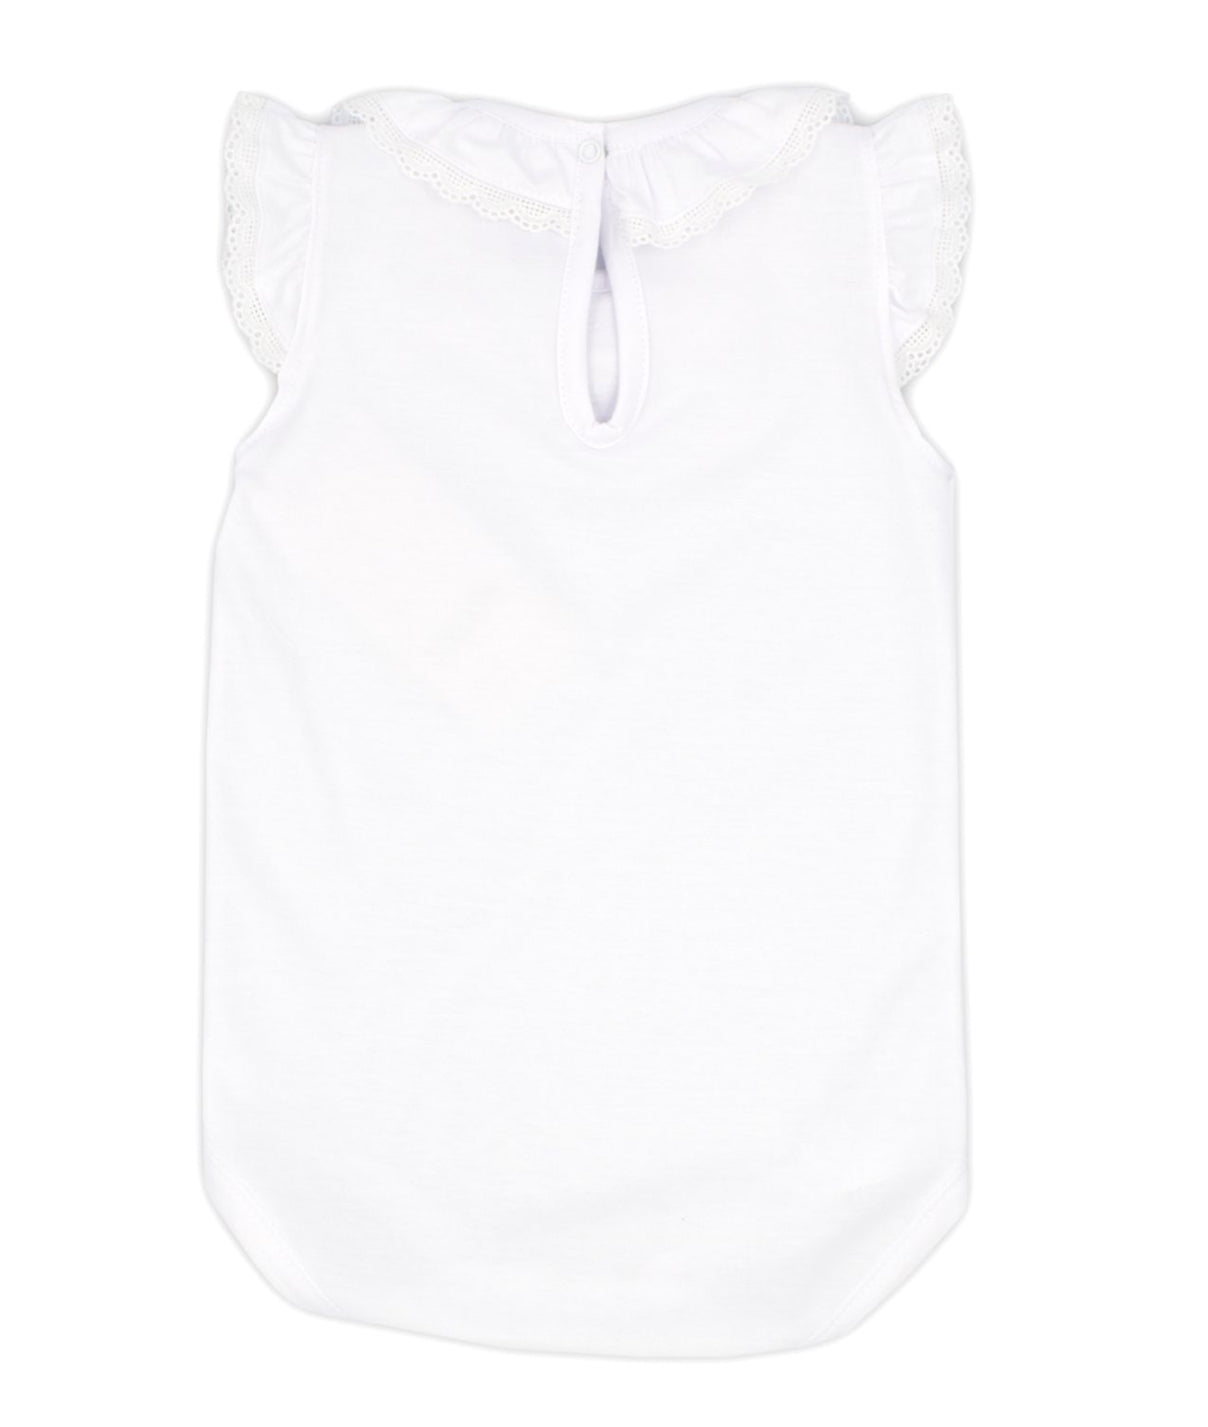 SALE Rapife Baby Girl’s White Cotton Sleeveless Body Top Frilled Collar